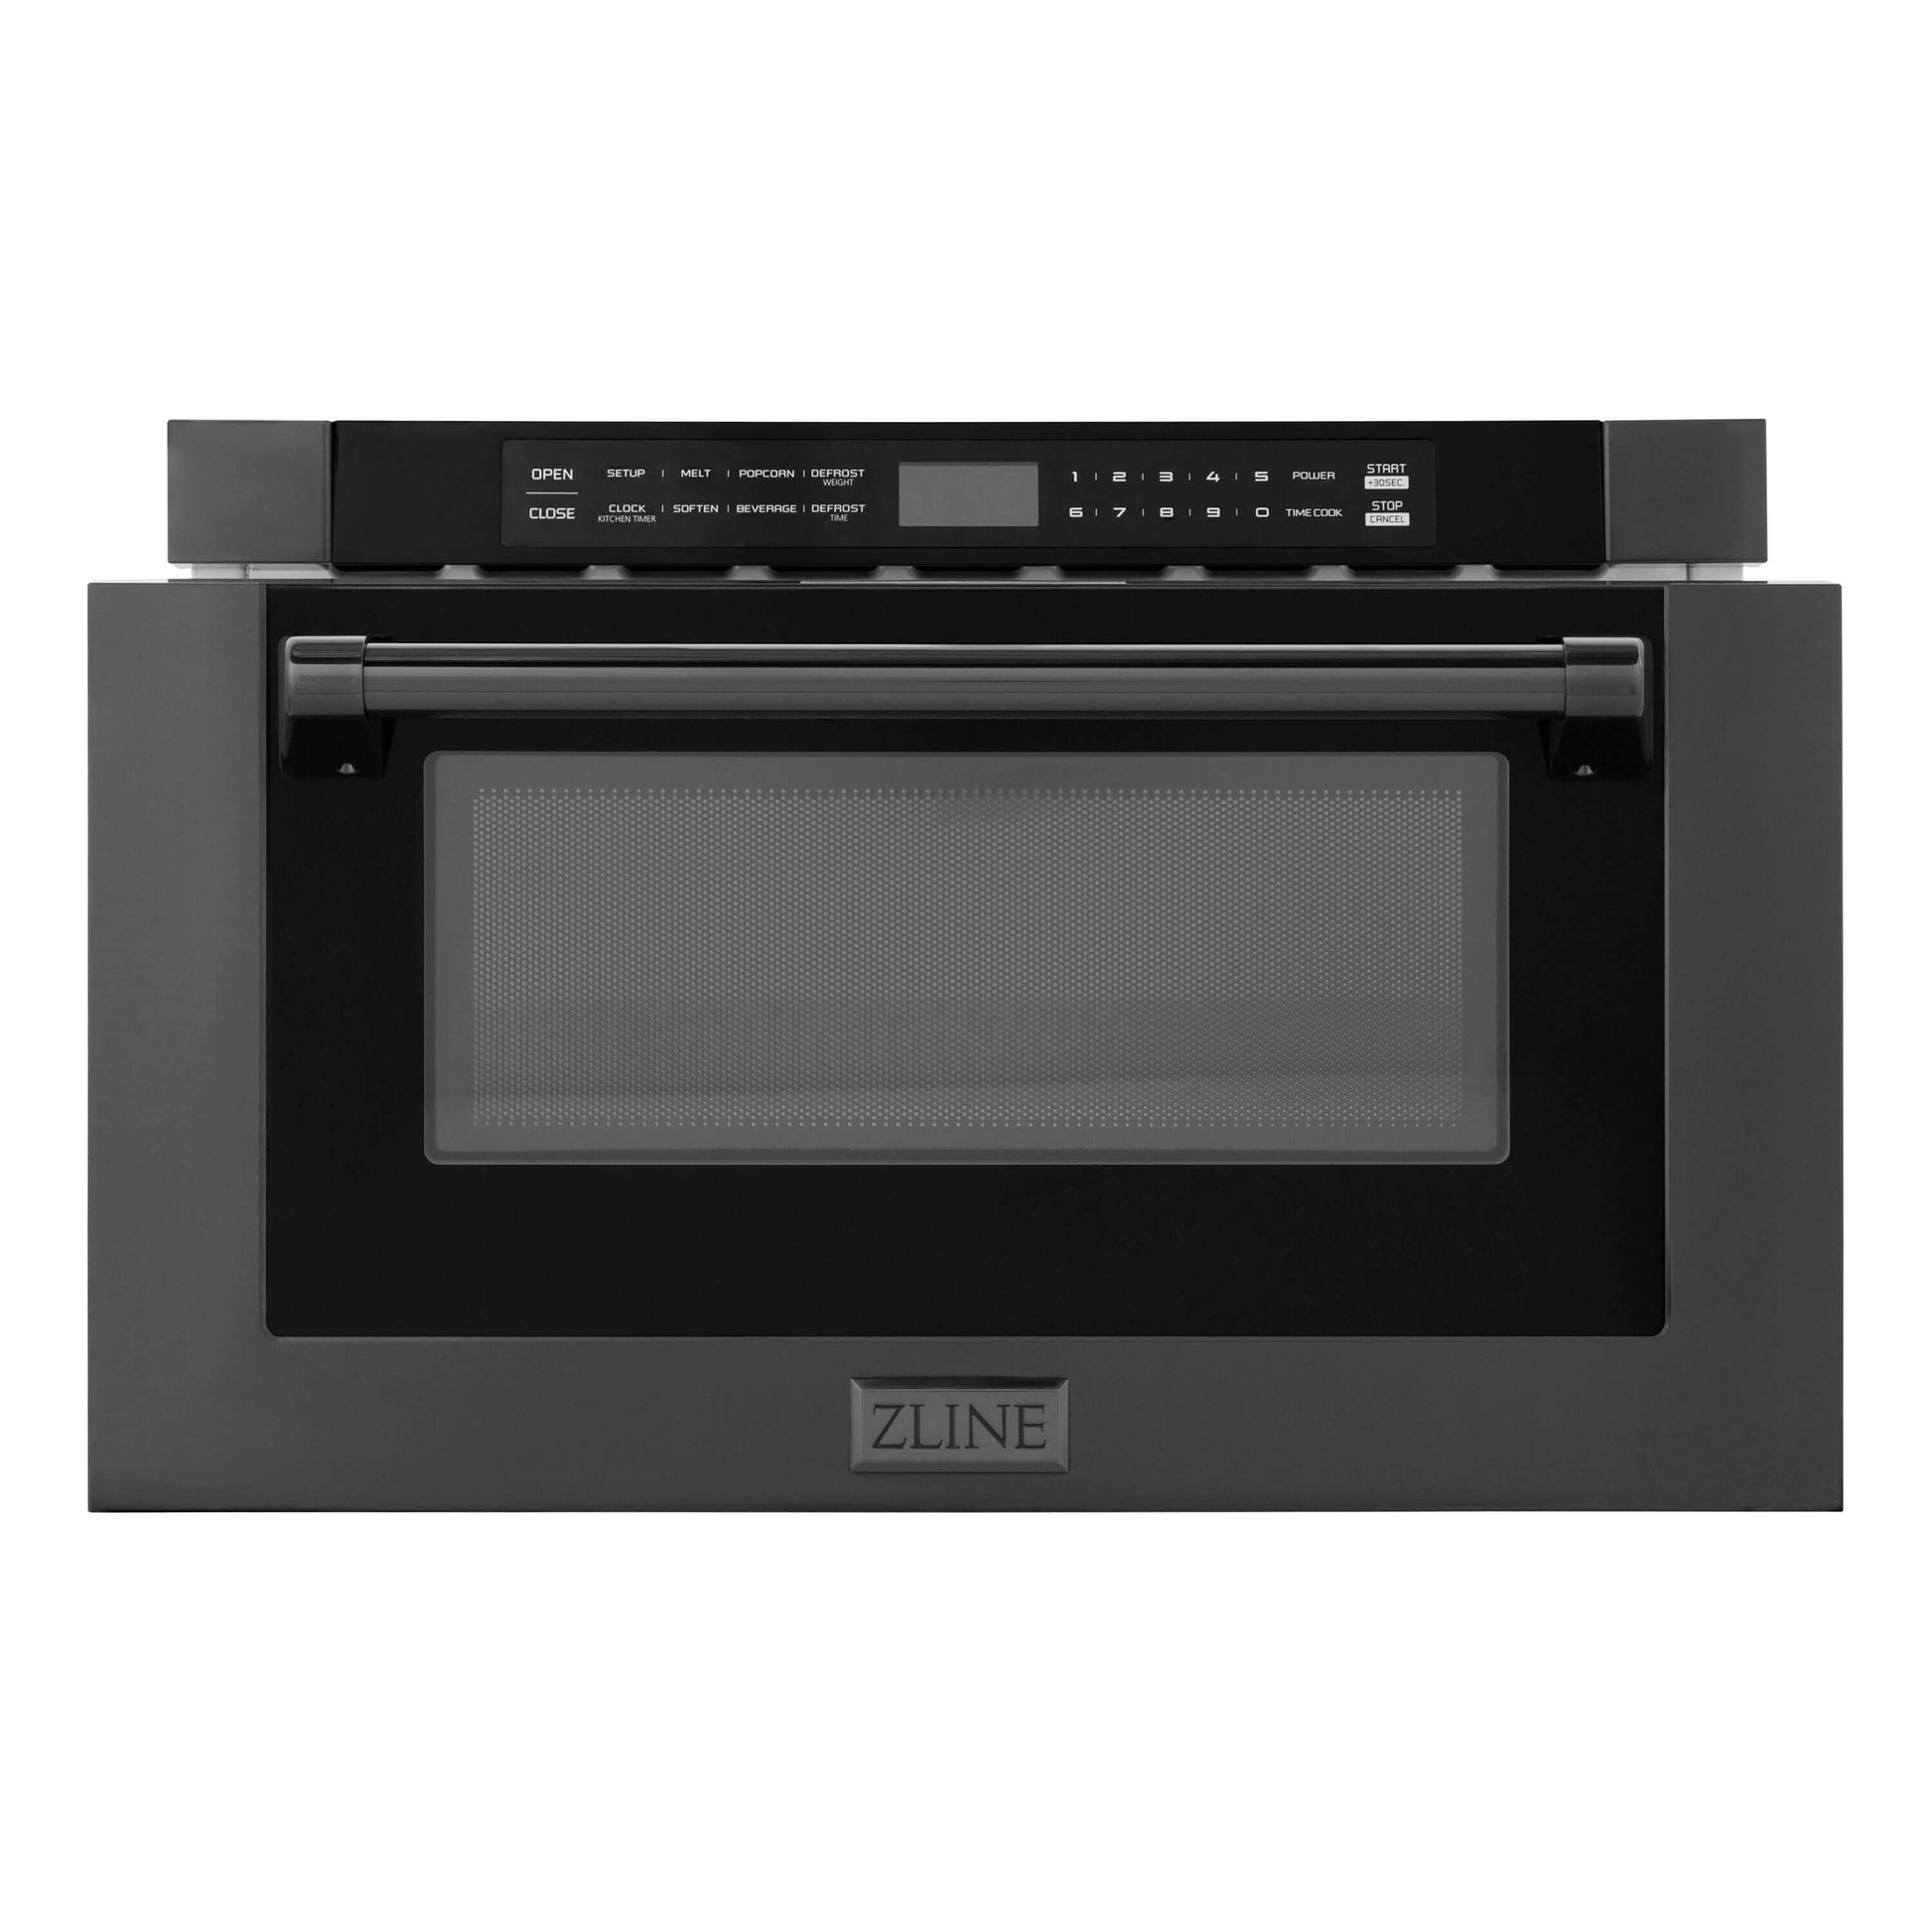 ZLINE 24" Built-in Microwave Drawer - Traditional Handle with Color Options